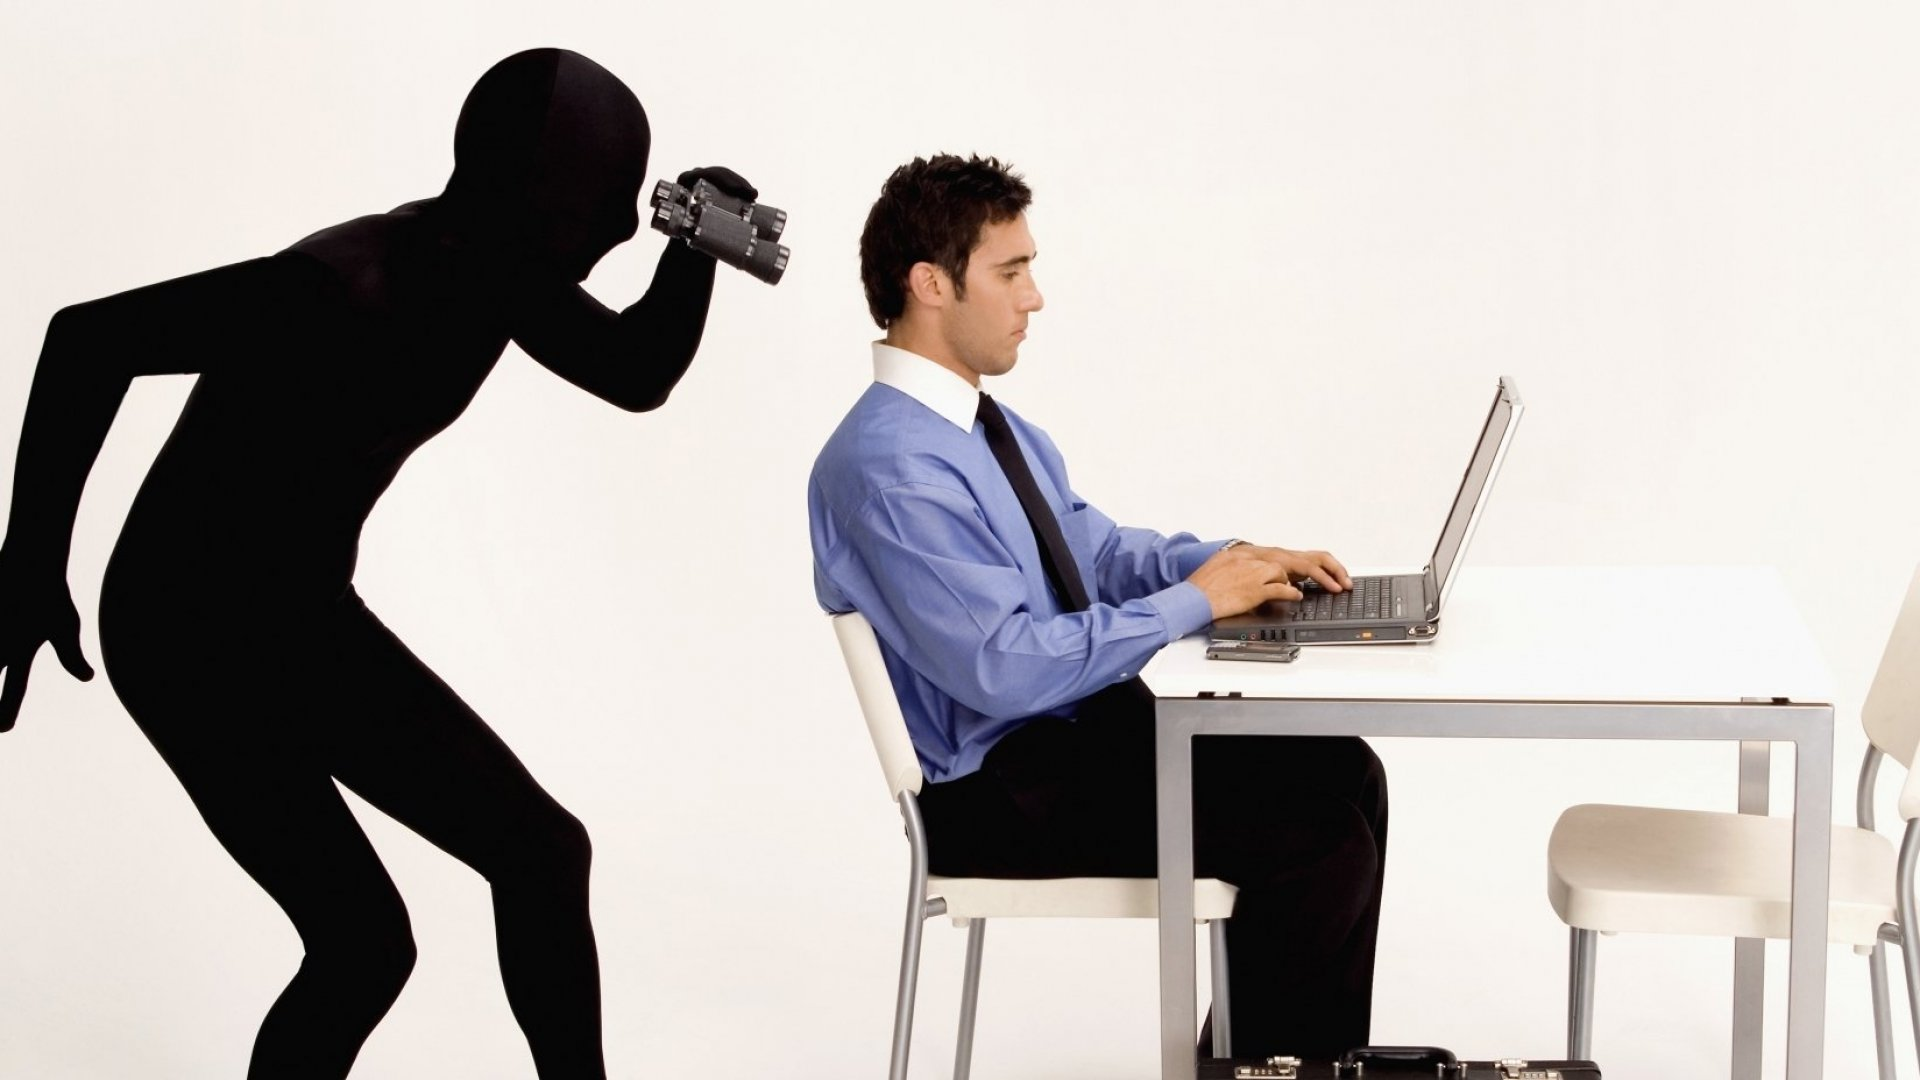 Infographic of a black shadow looking over the shoulder of a man working on a laptop